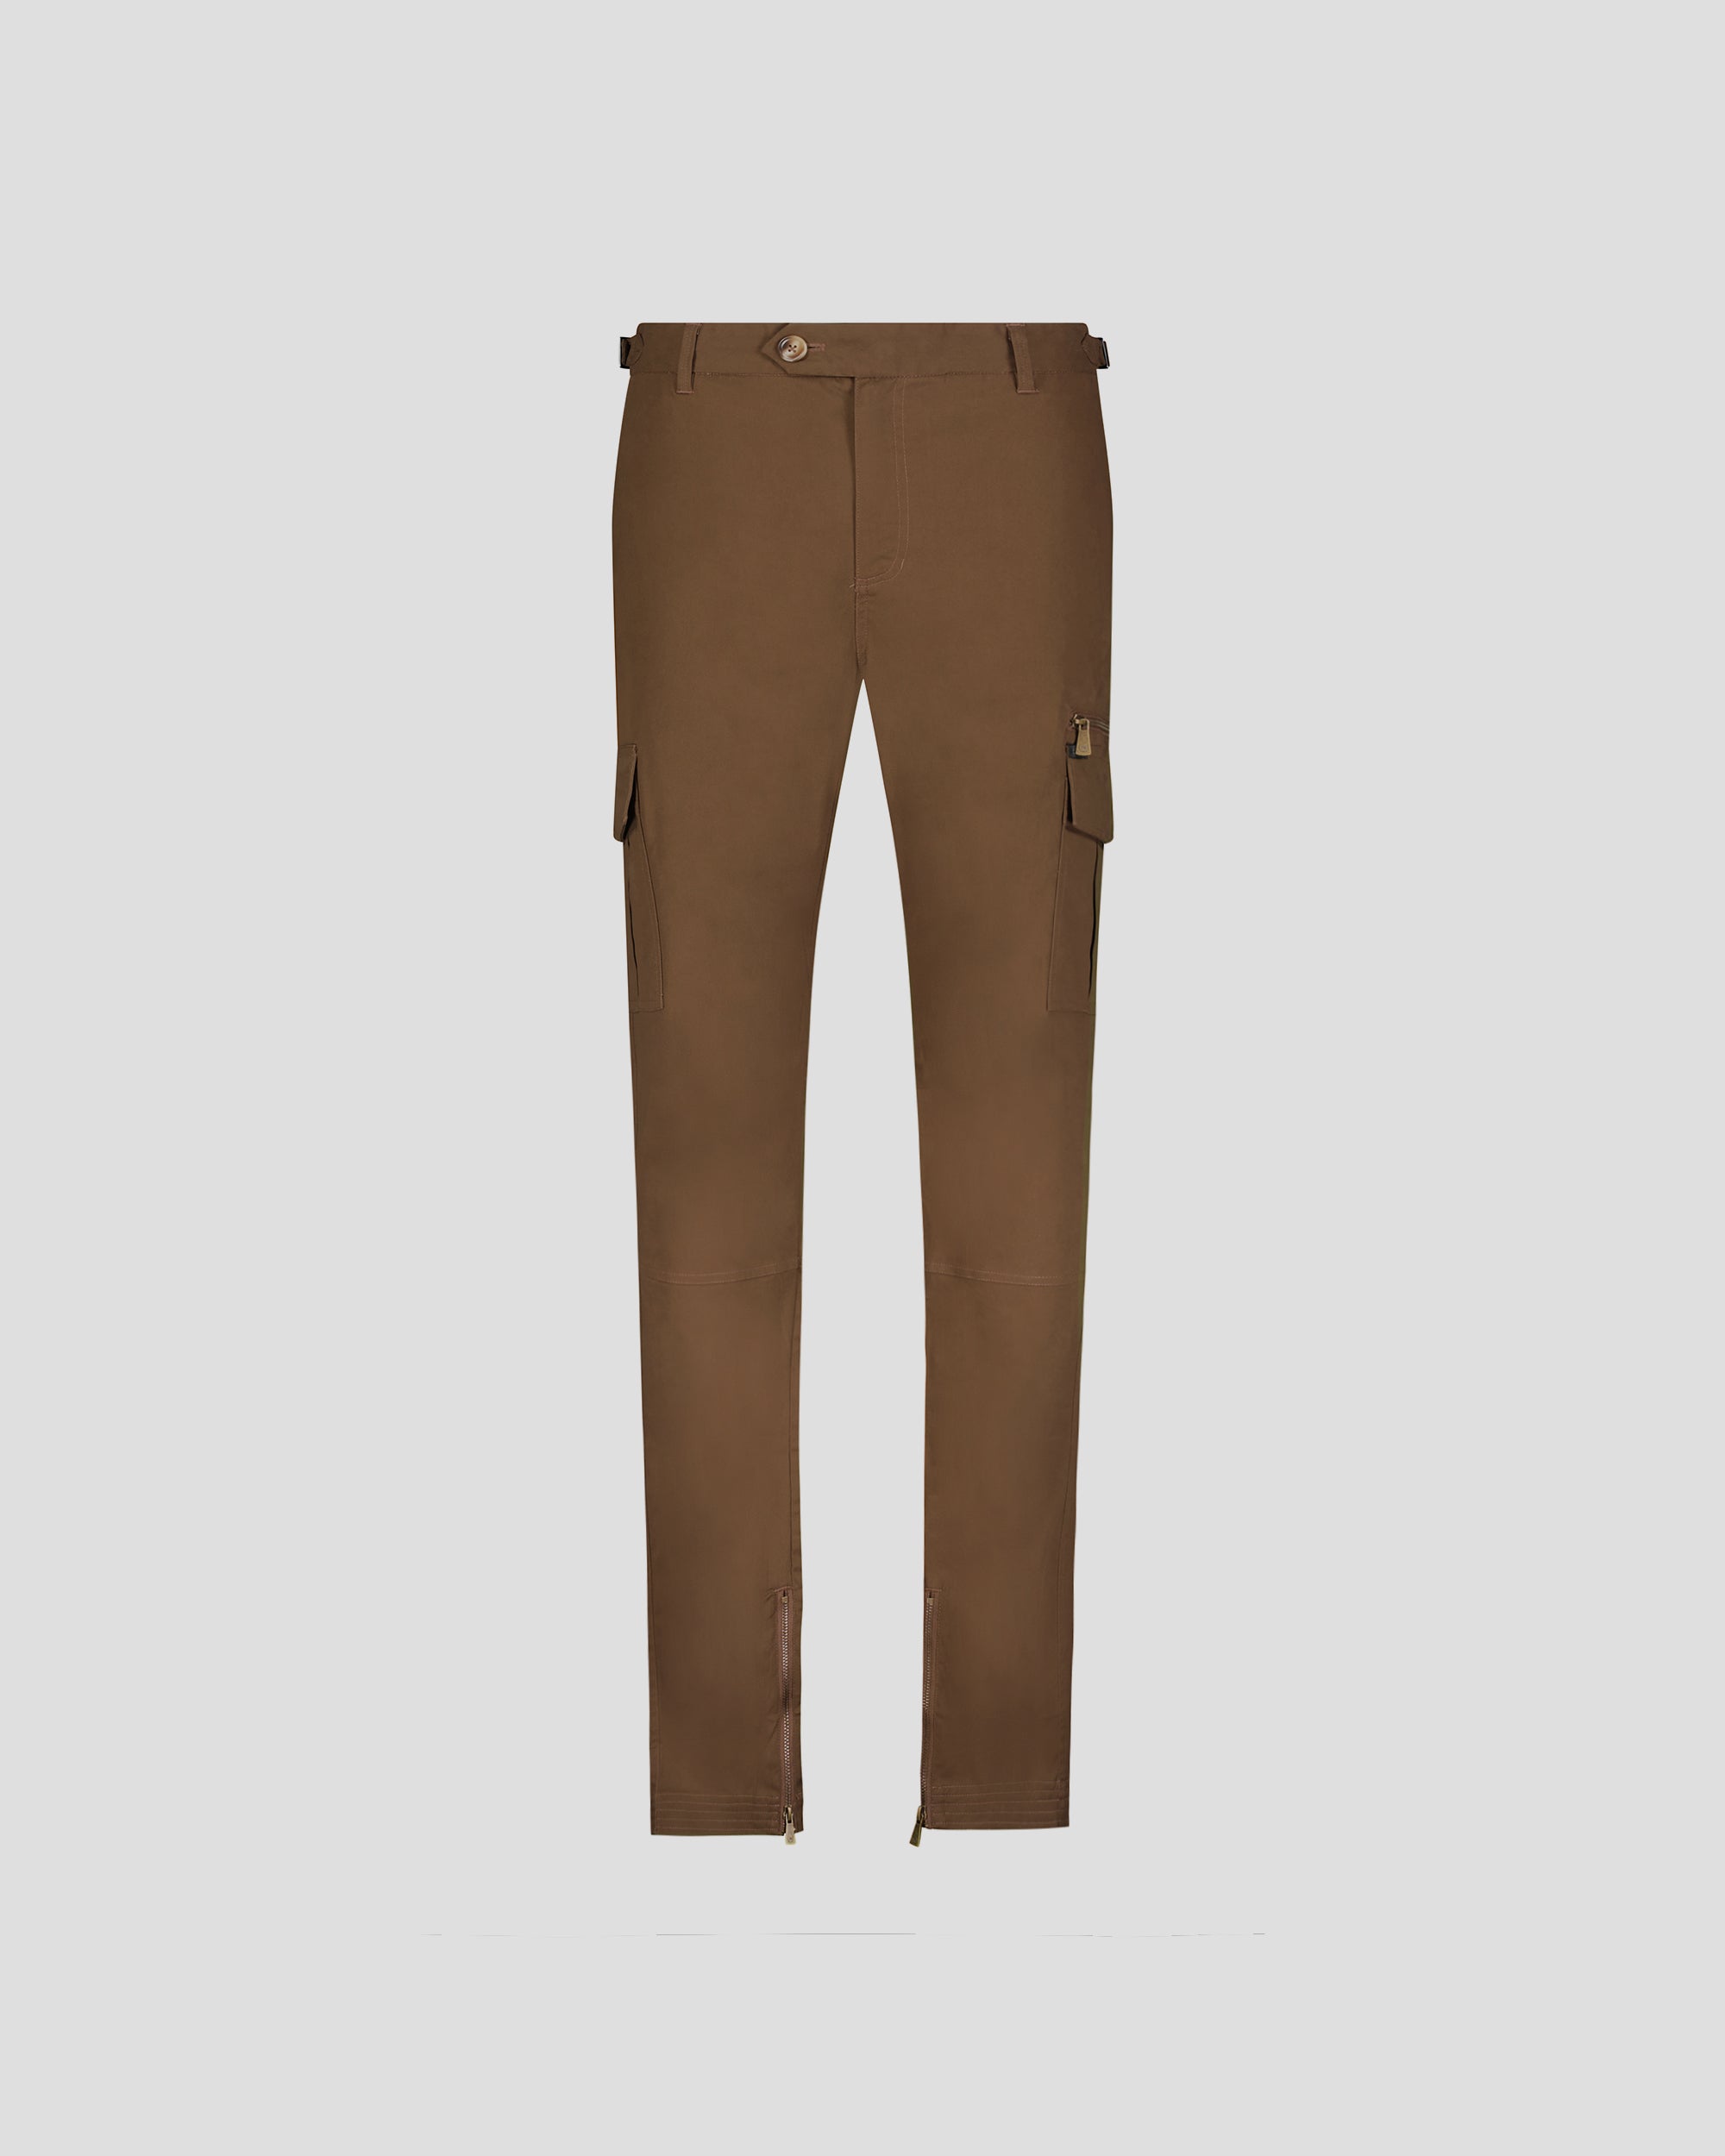 Buy Brown Trousers & Pants for Women by Marks & Spencer Online | Ajio.com